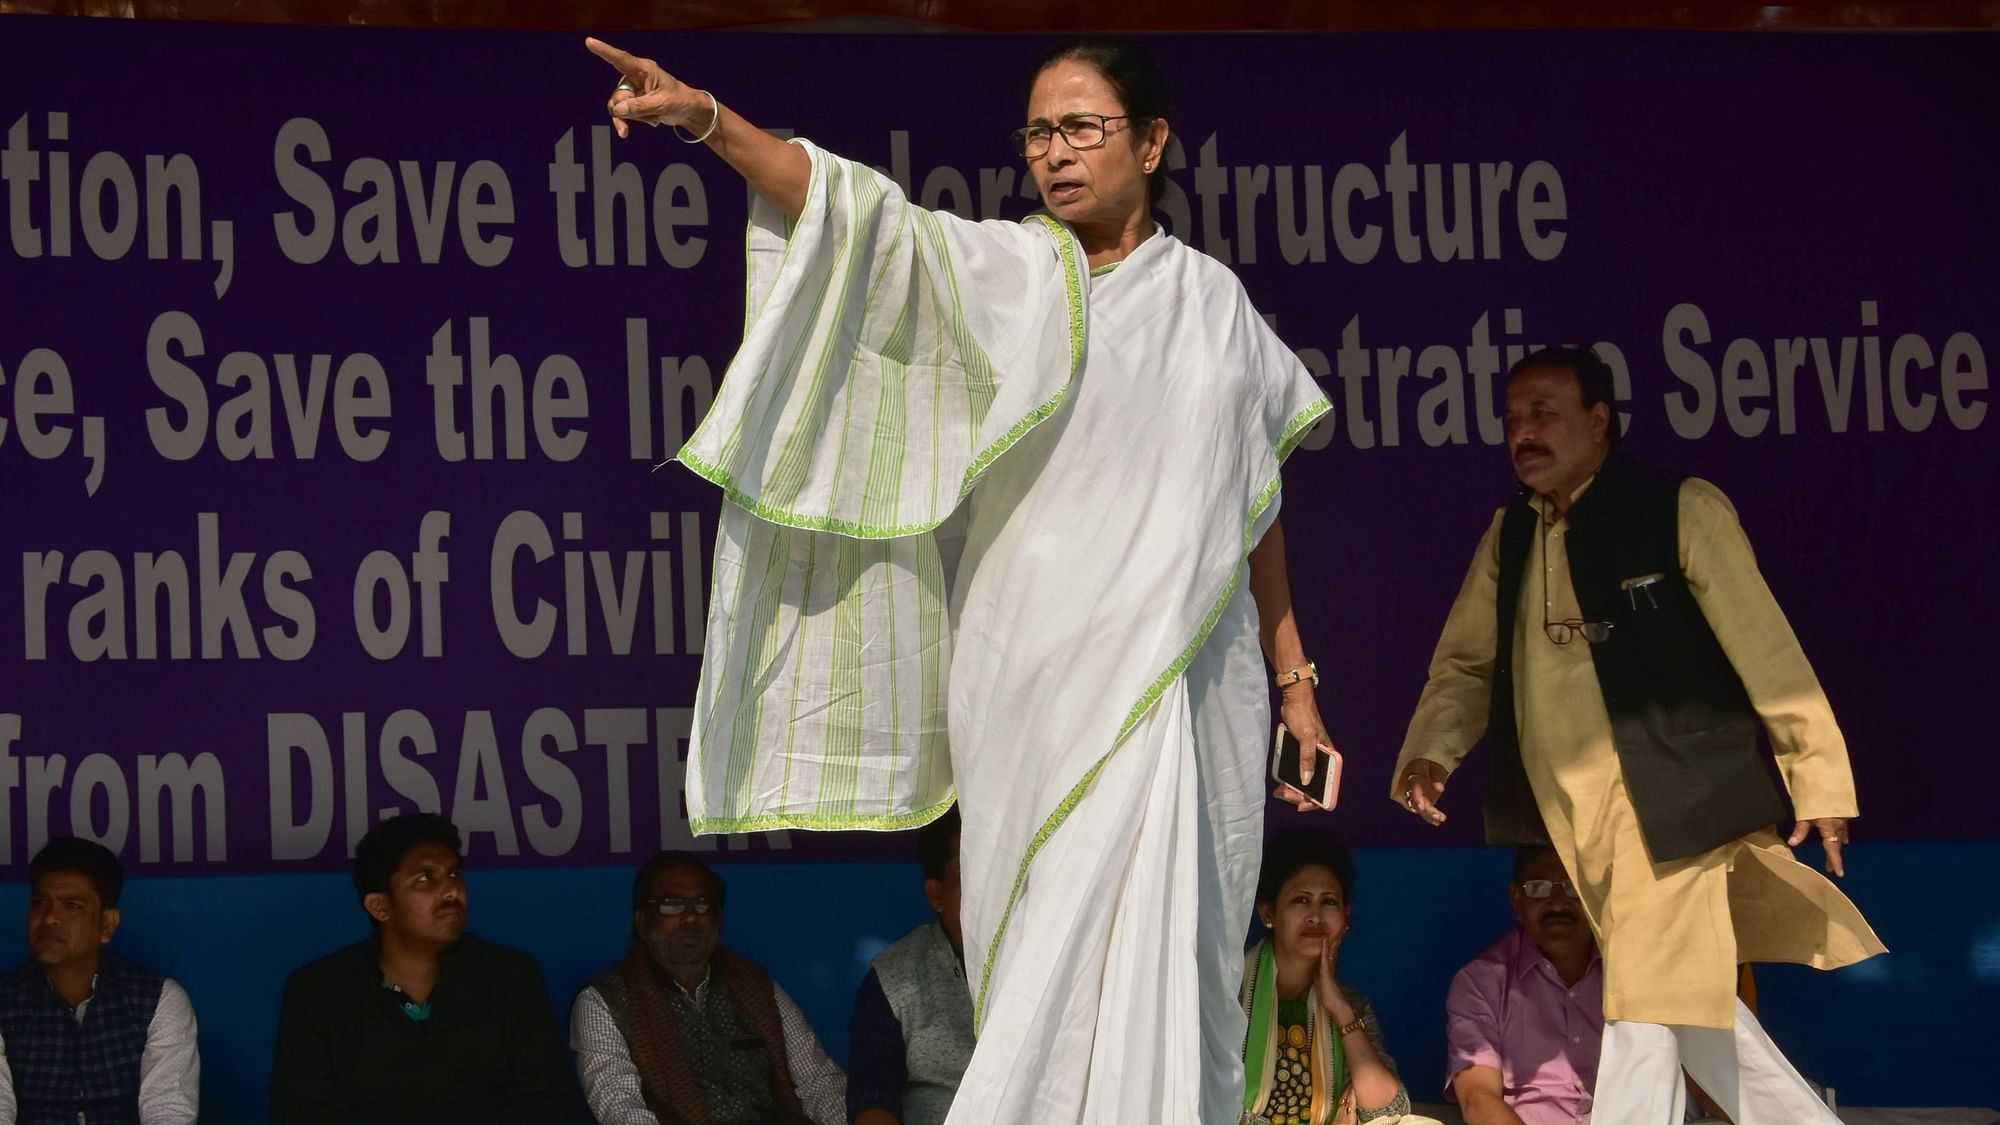 West Bengal Chief Minister Mamata Banerjee during her sit-in protest against the Centre over CBI’s attempt to question the Kolkata Police commissioner.